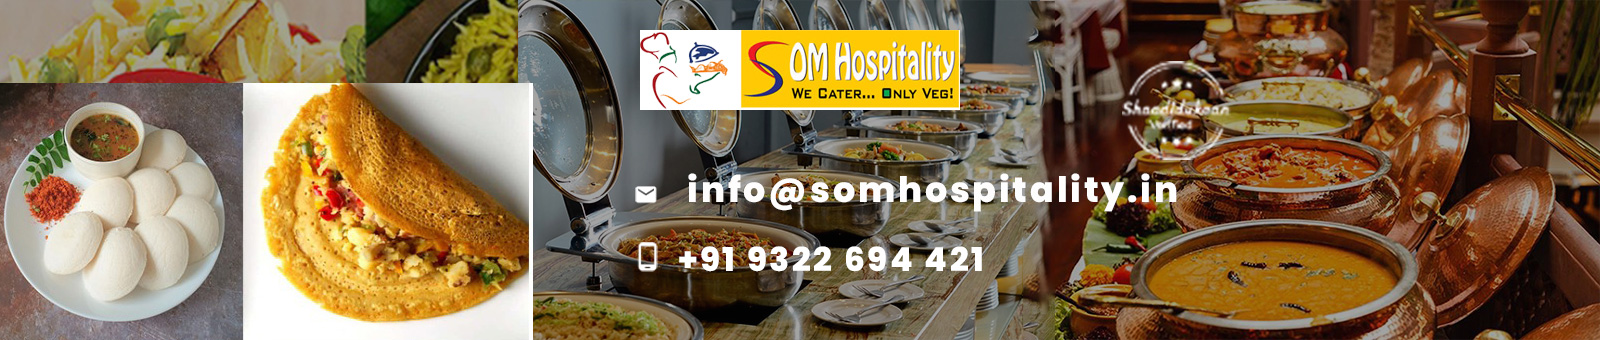 som-caterers-lead-by-som-hospitality